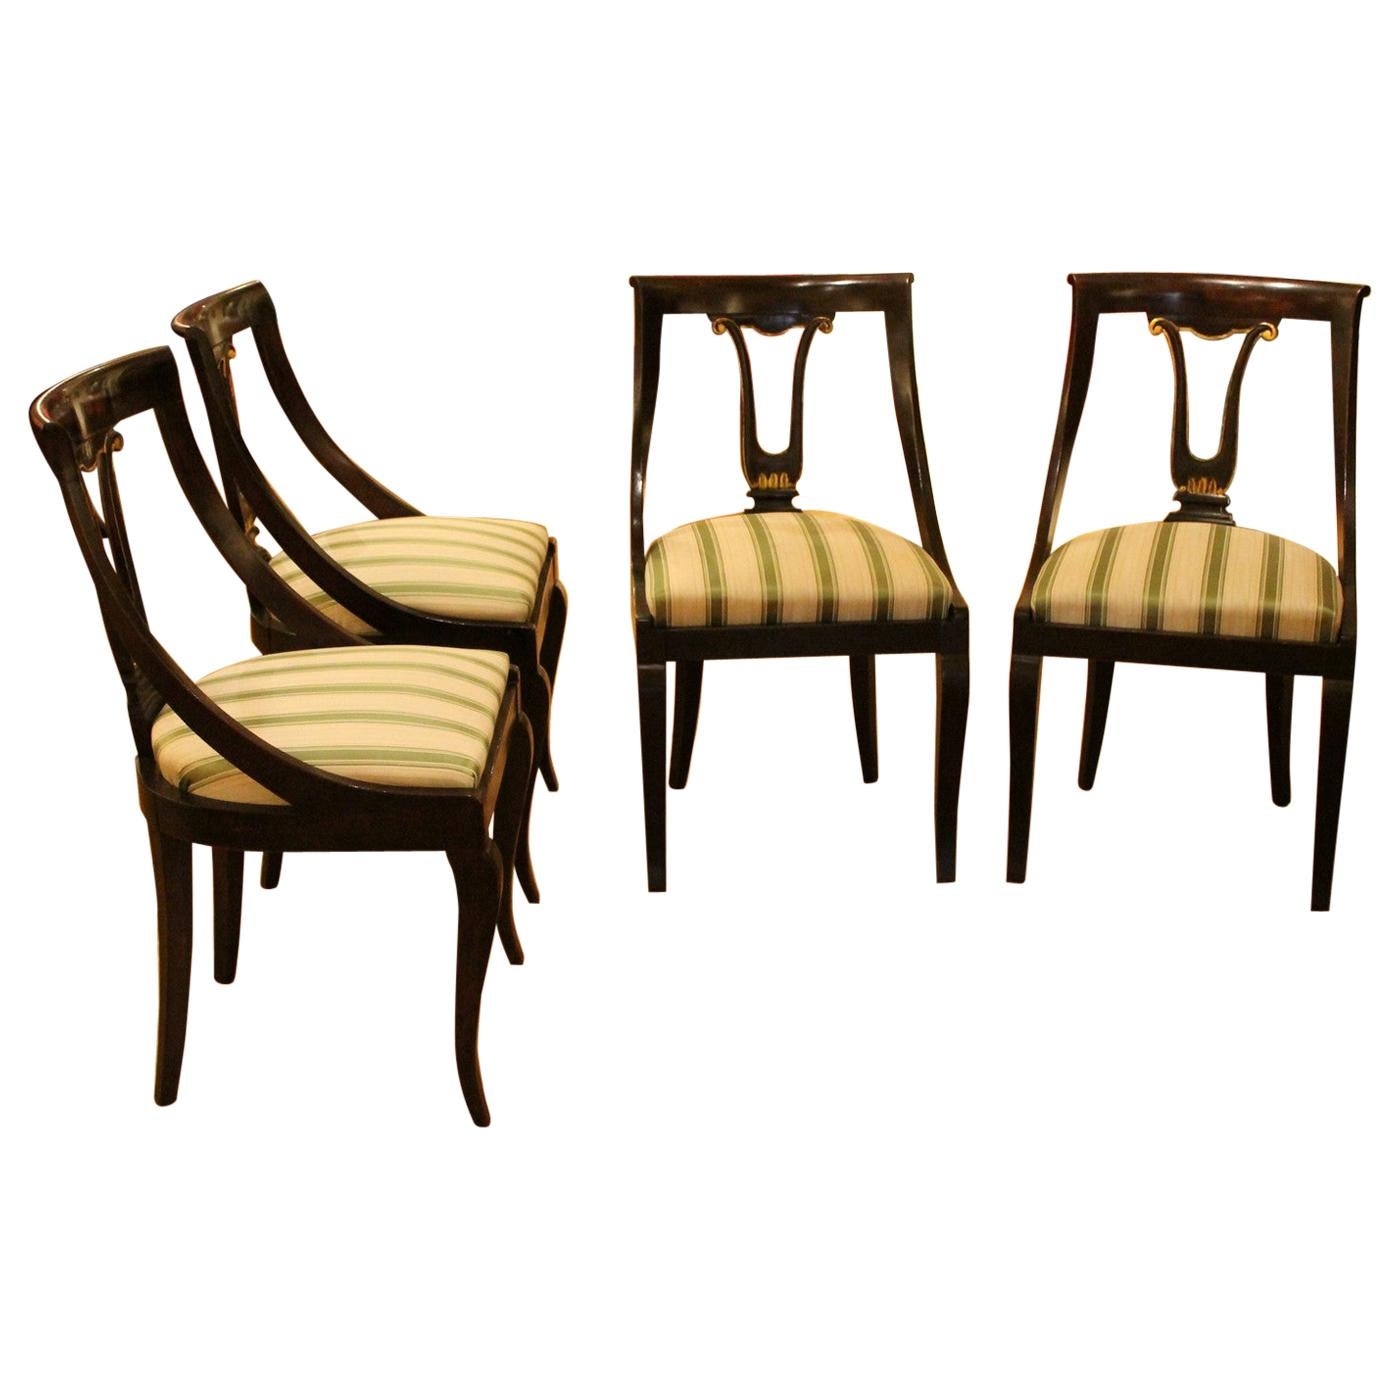 French 18th Century Directoire Mahogany Chairs with Silk Blend Upholster Fabric For Sale